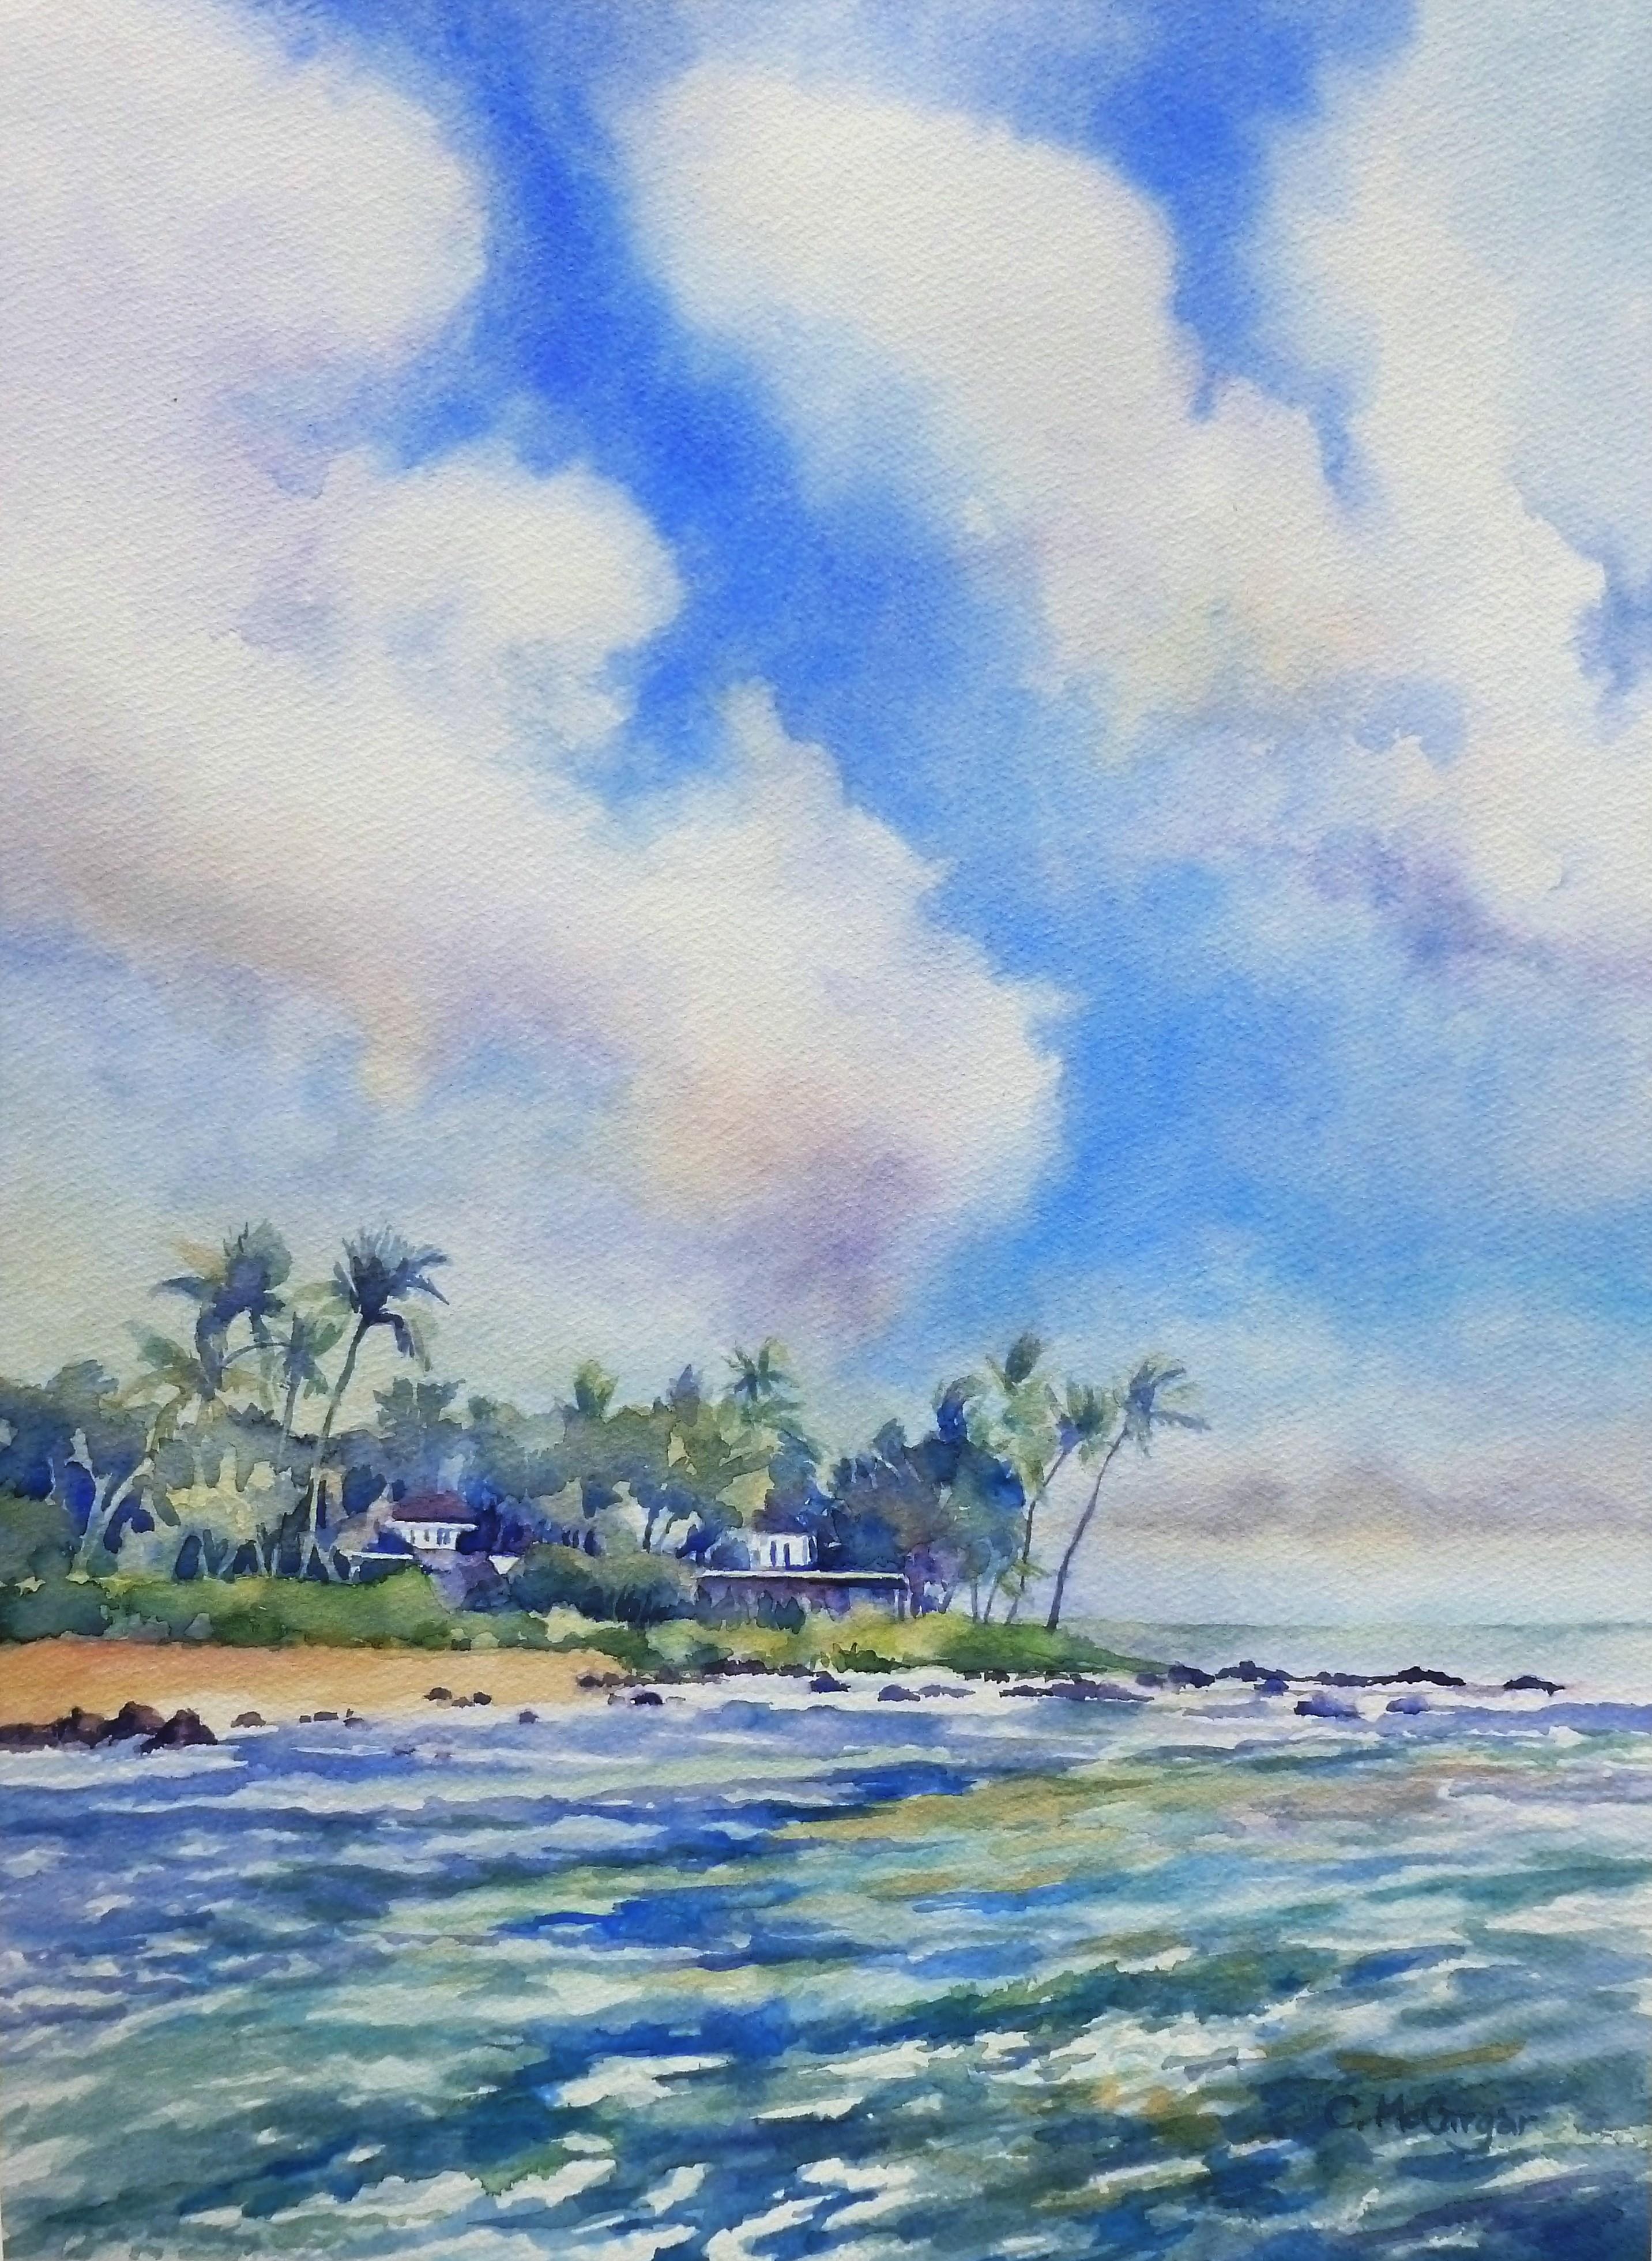 Kauai Catherine McCargar, Watercolor painting on paper
Ready to frame
One-of-a-kind
Signed on front
2017
19 in. h x 14 in. w 
0 lbs. 2 oz. 

 Artist Comments 
In many places, the sky is as interesting, or even more interesting than the land. On the